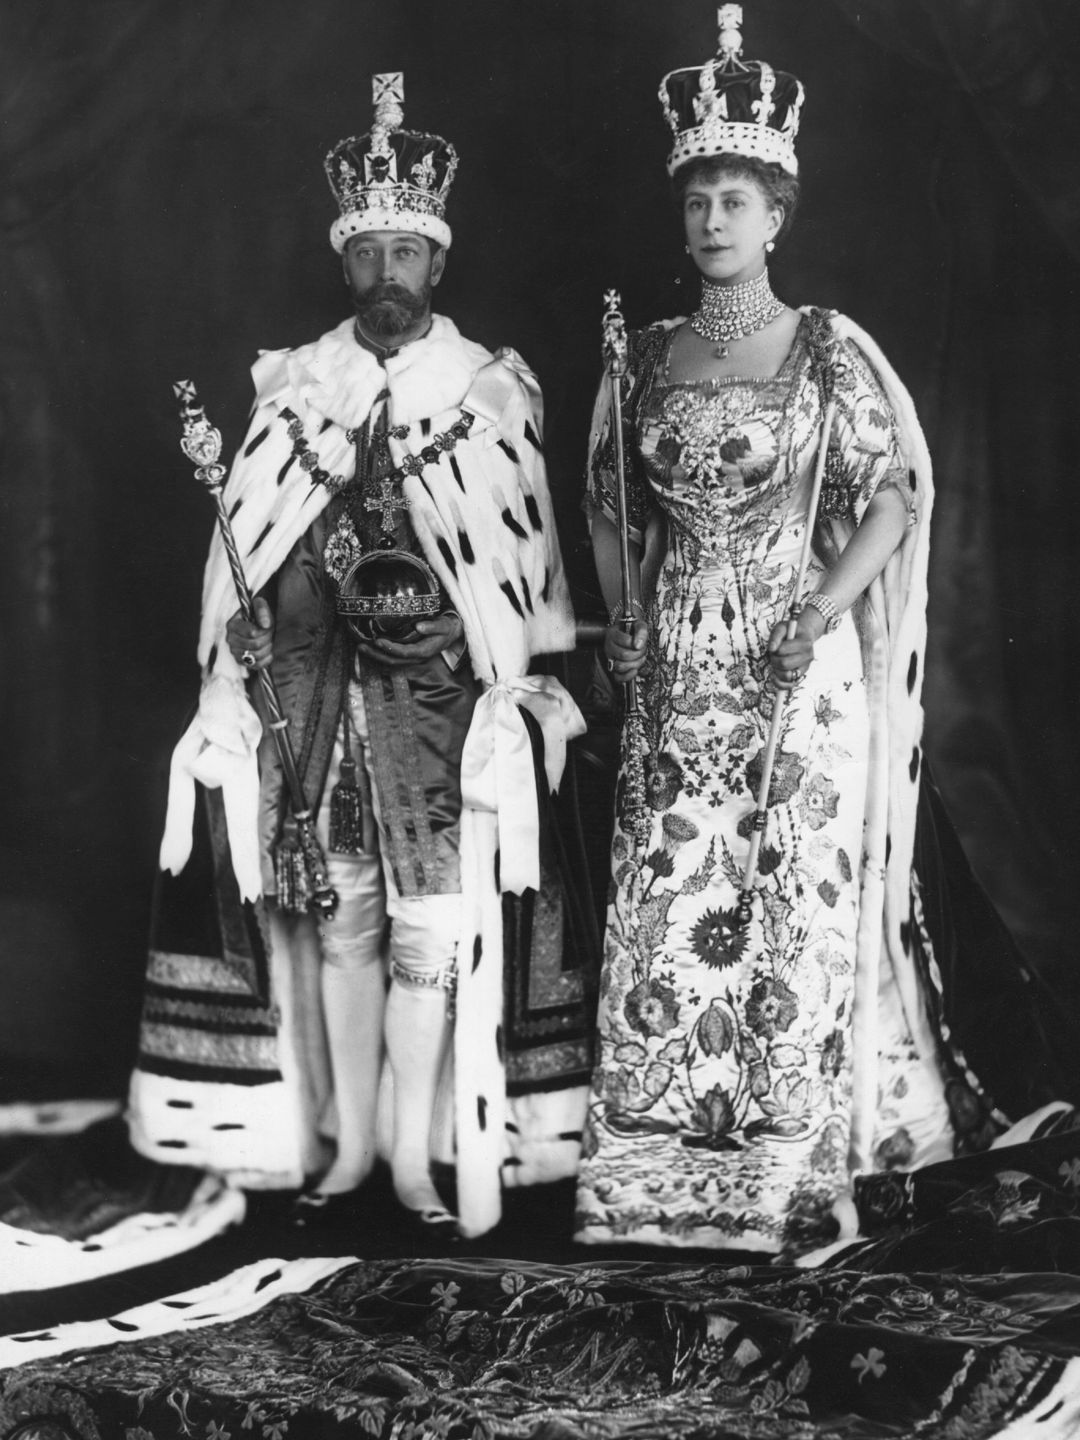 King George V and his wife Mary of Teck in their coronation robes